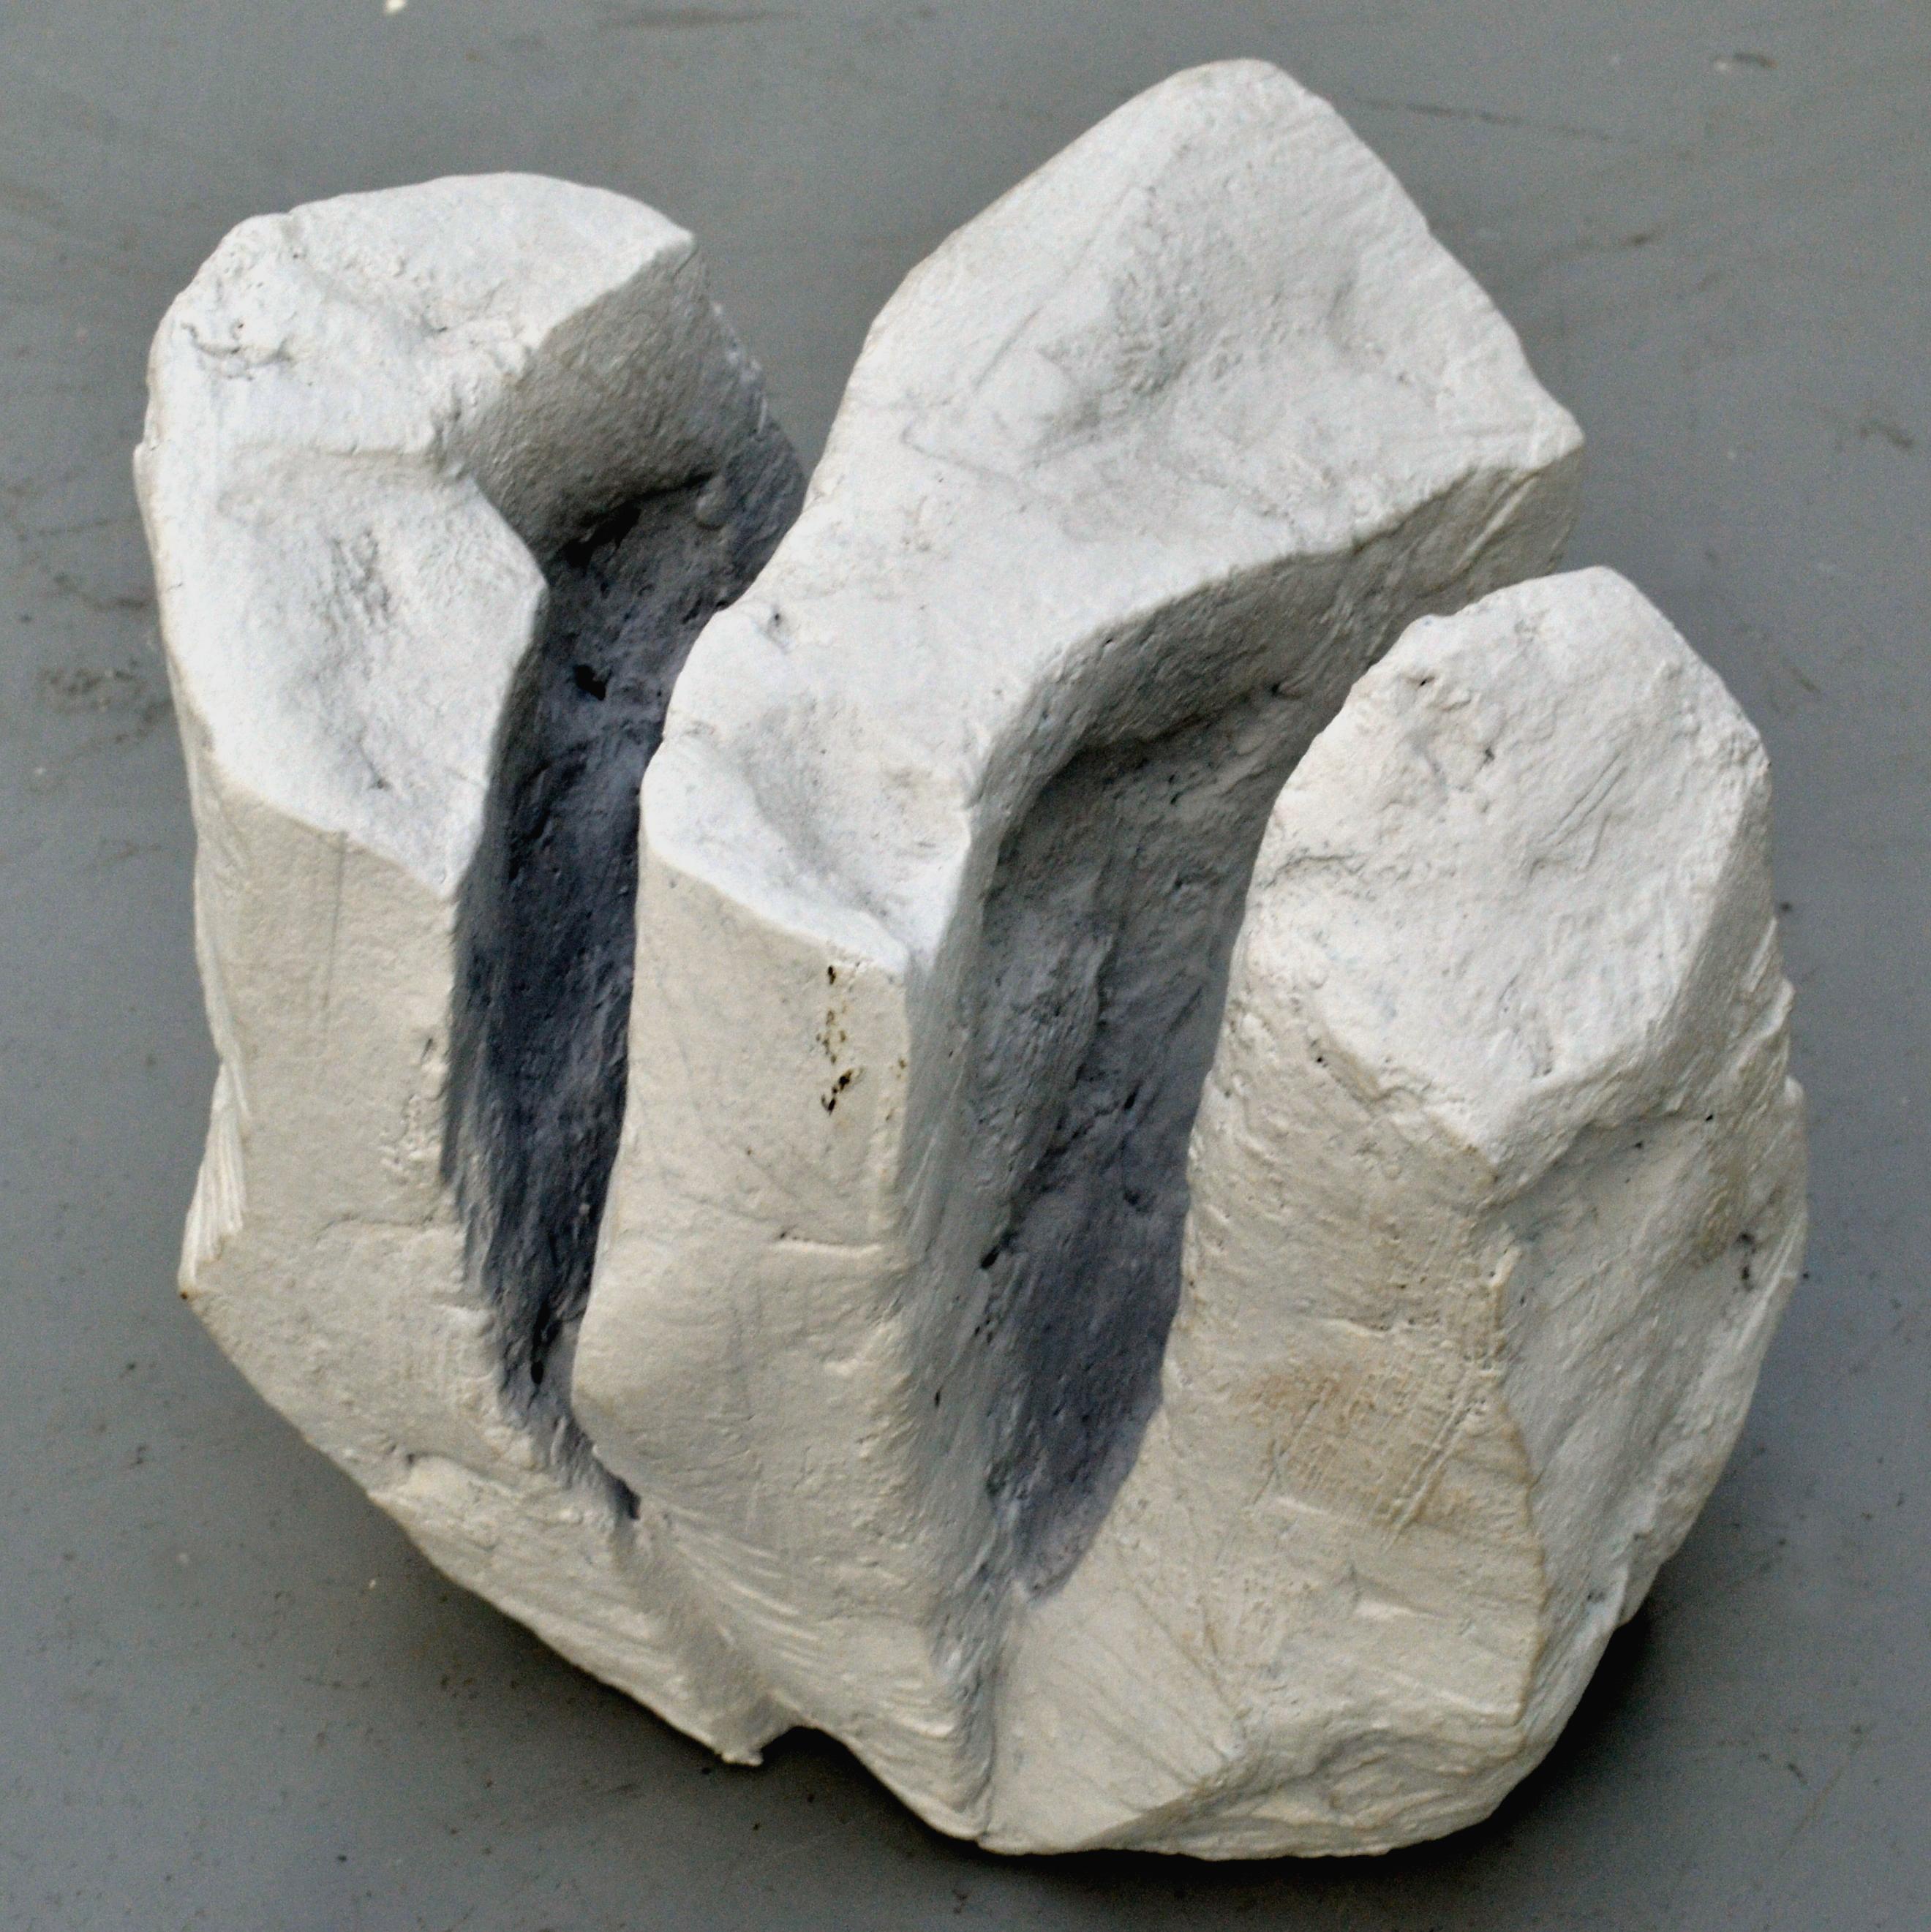 Abstract White Rock Sculpture are hand sculpted in ceramic. The sculptures resemble white cliffs on the British coast line. They are chalk-white washed after firing.
Bryan Blow's work echoes a voyage of discovery in not just the visible natural